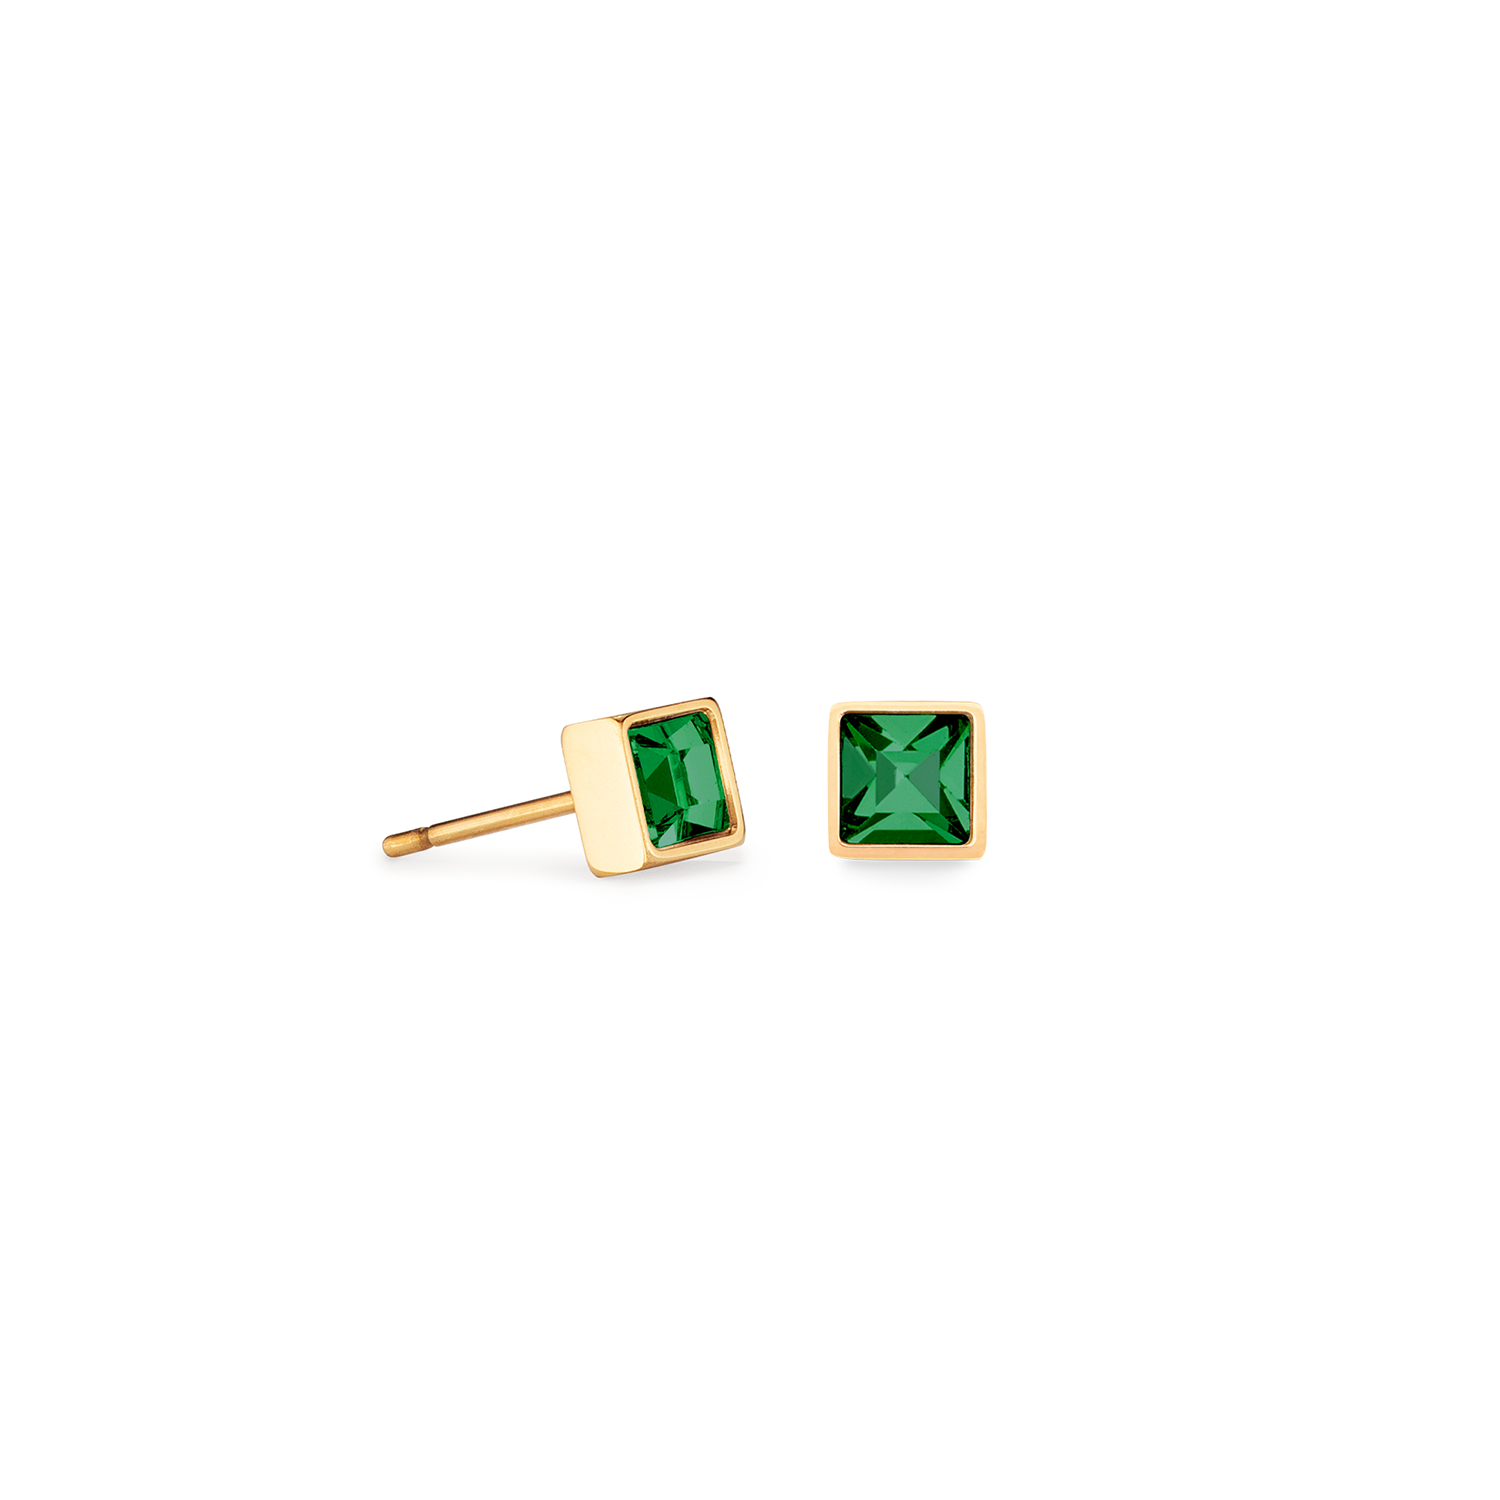 Brilliant Square Small Stud Earrings with Crystals 0501/21_0549 - Green